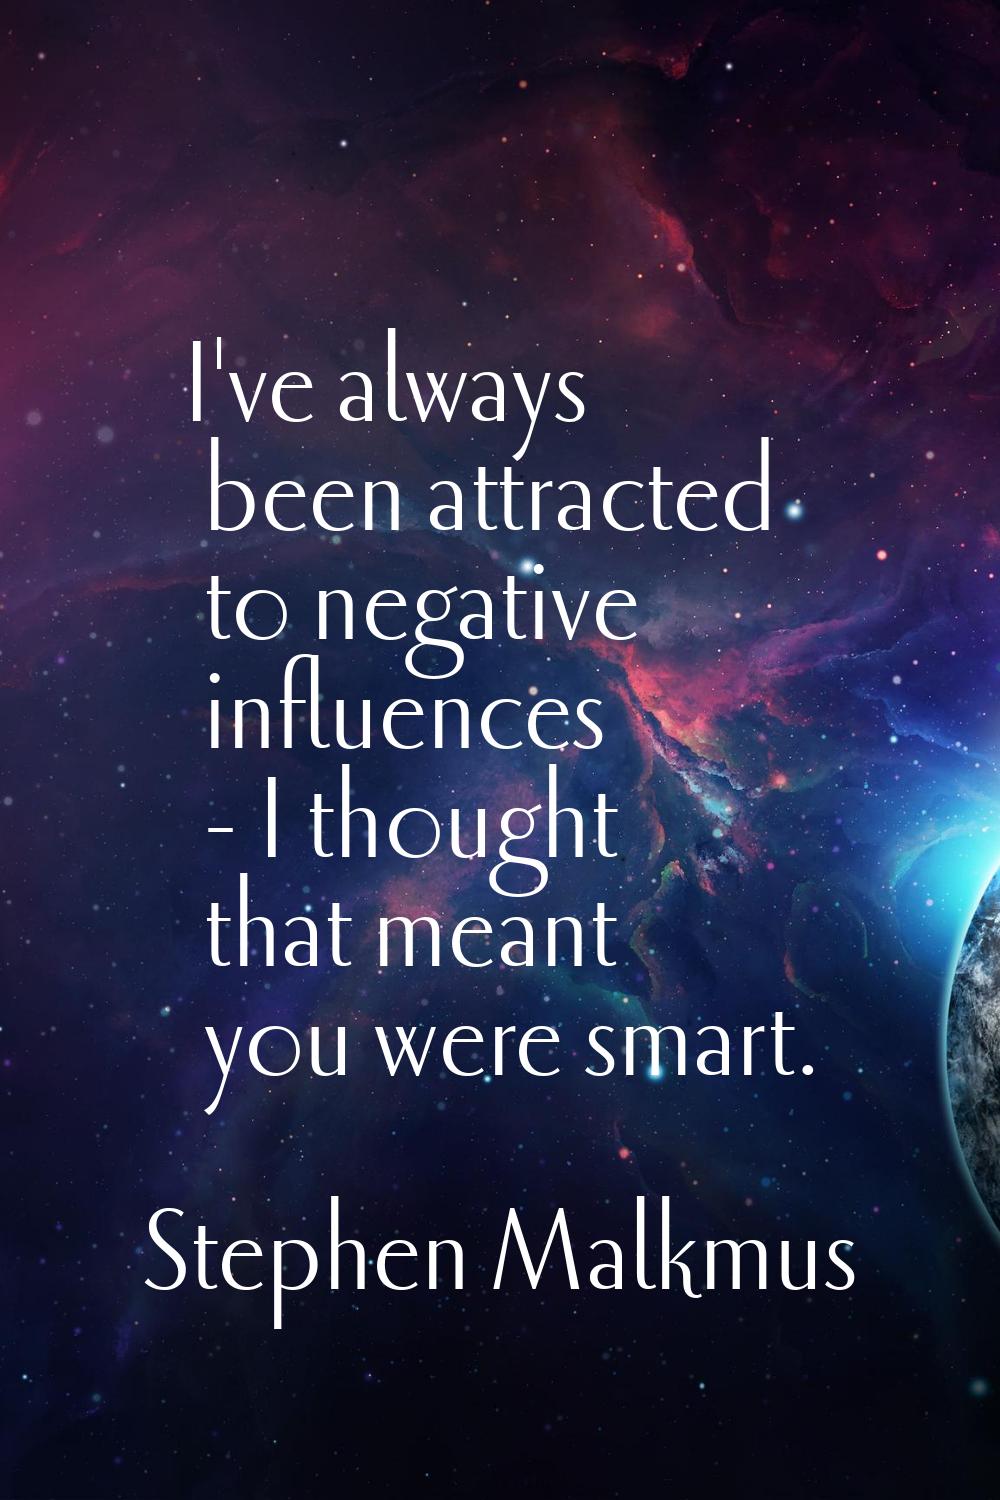 I've always been attracted to negative influences - I thought that meant you were smart.